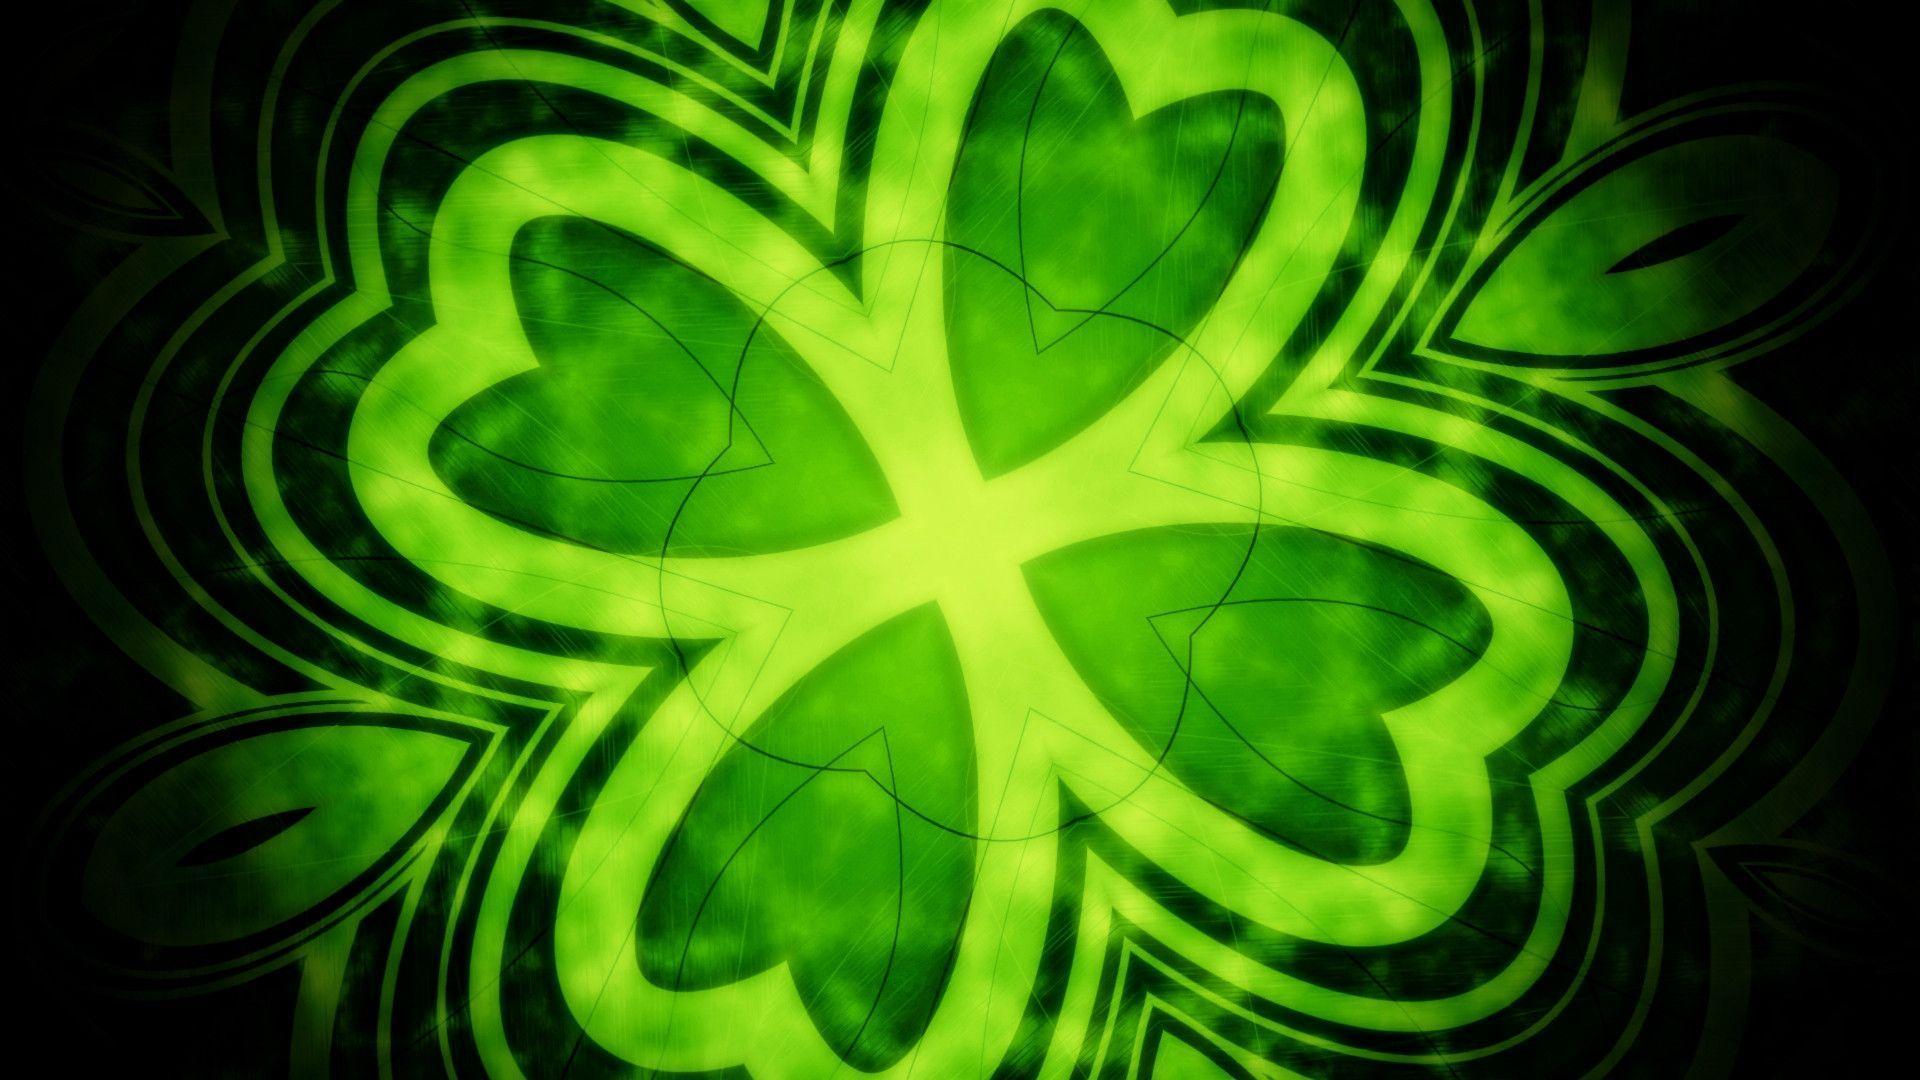 lucky Android wallpaper for St. Patrick's Day